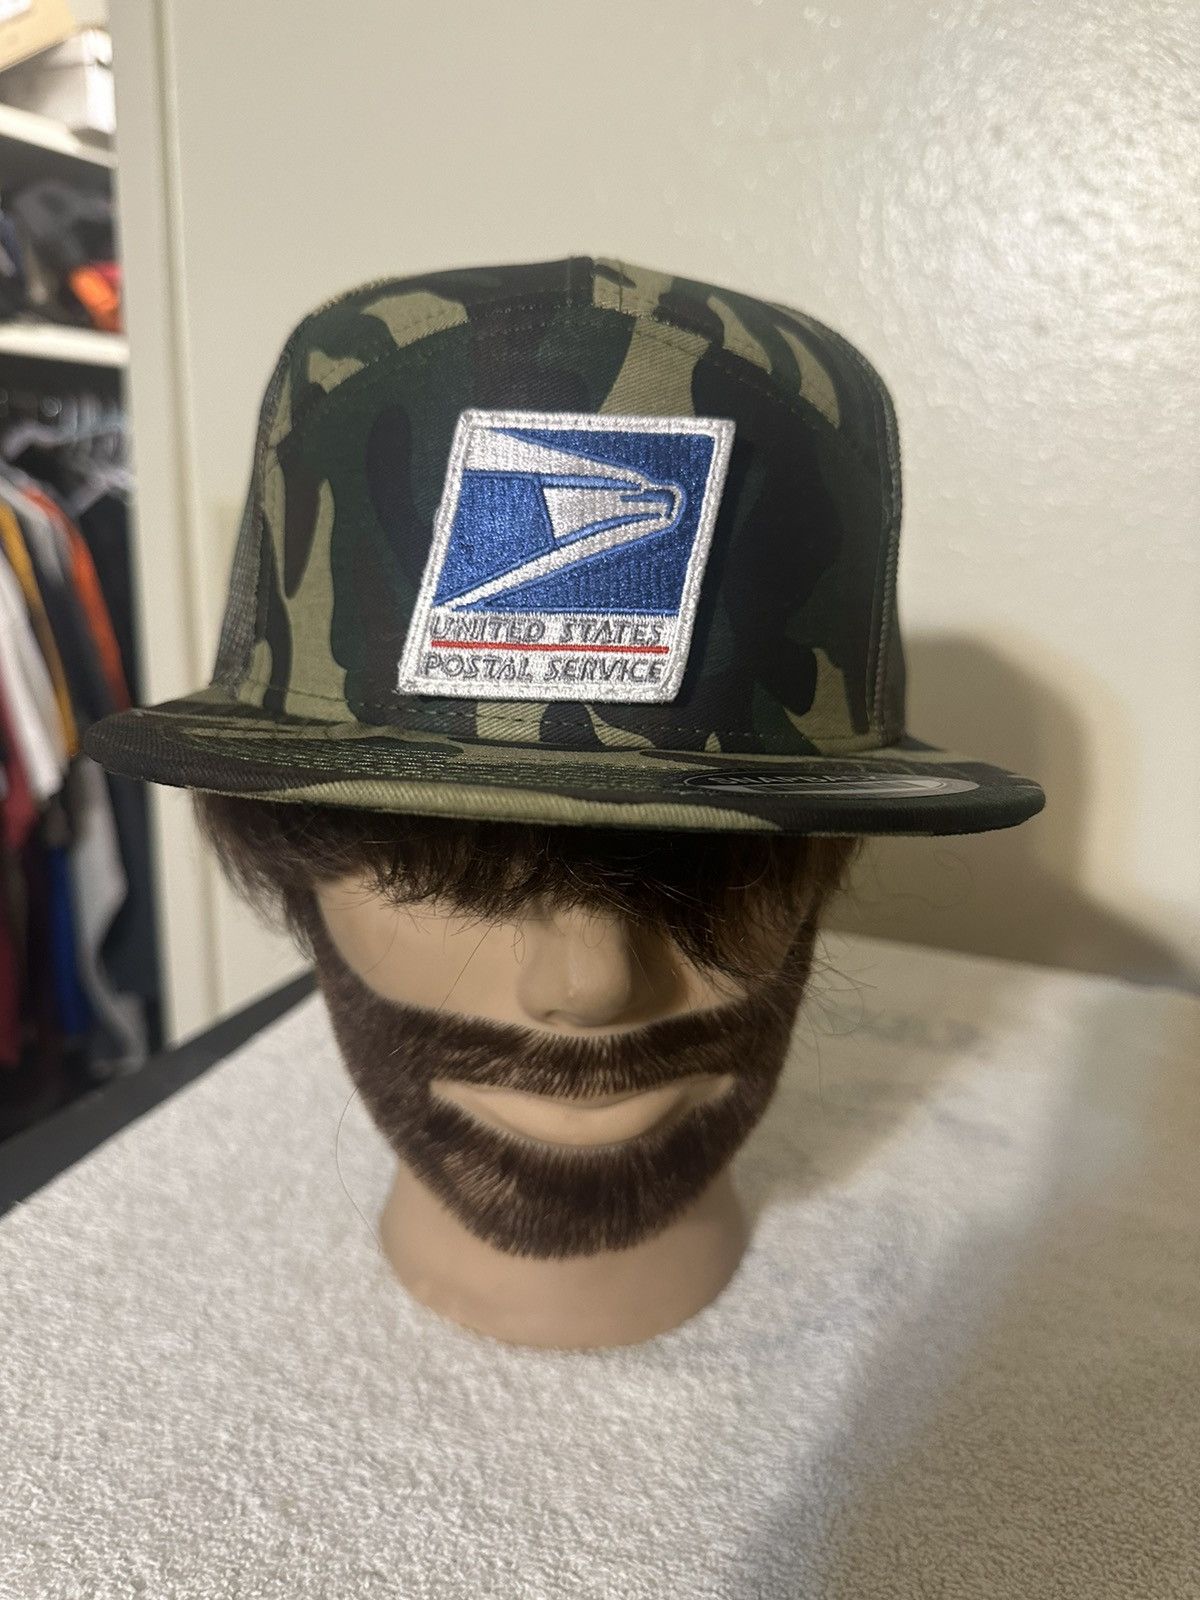 Anti social social club x usps hat for Sale in Downers Grove, IL - OfferUp